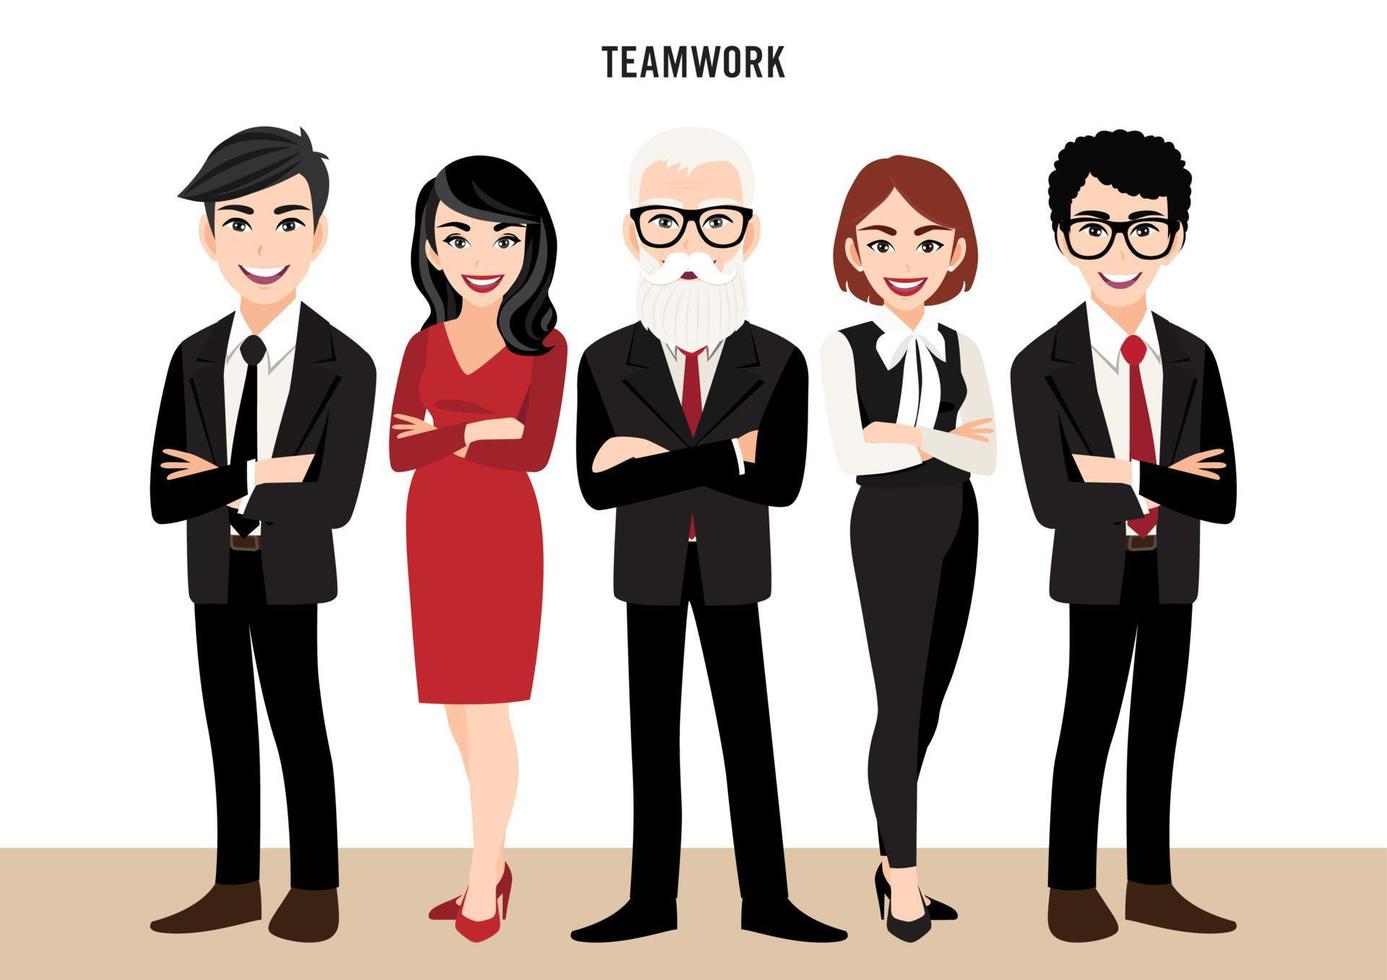 Cartoon character with business team set or leadership concept. Vector illustration in cartoon style.